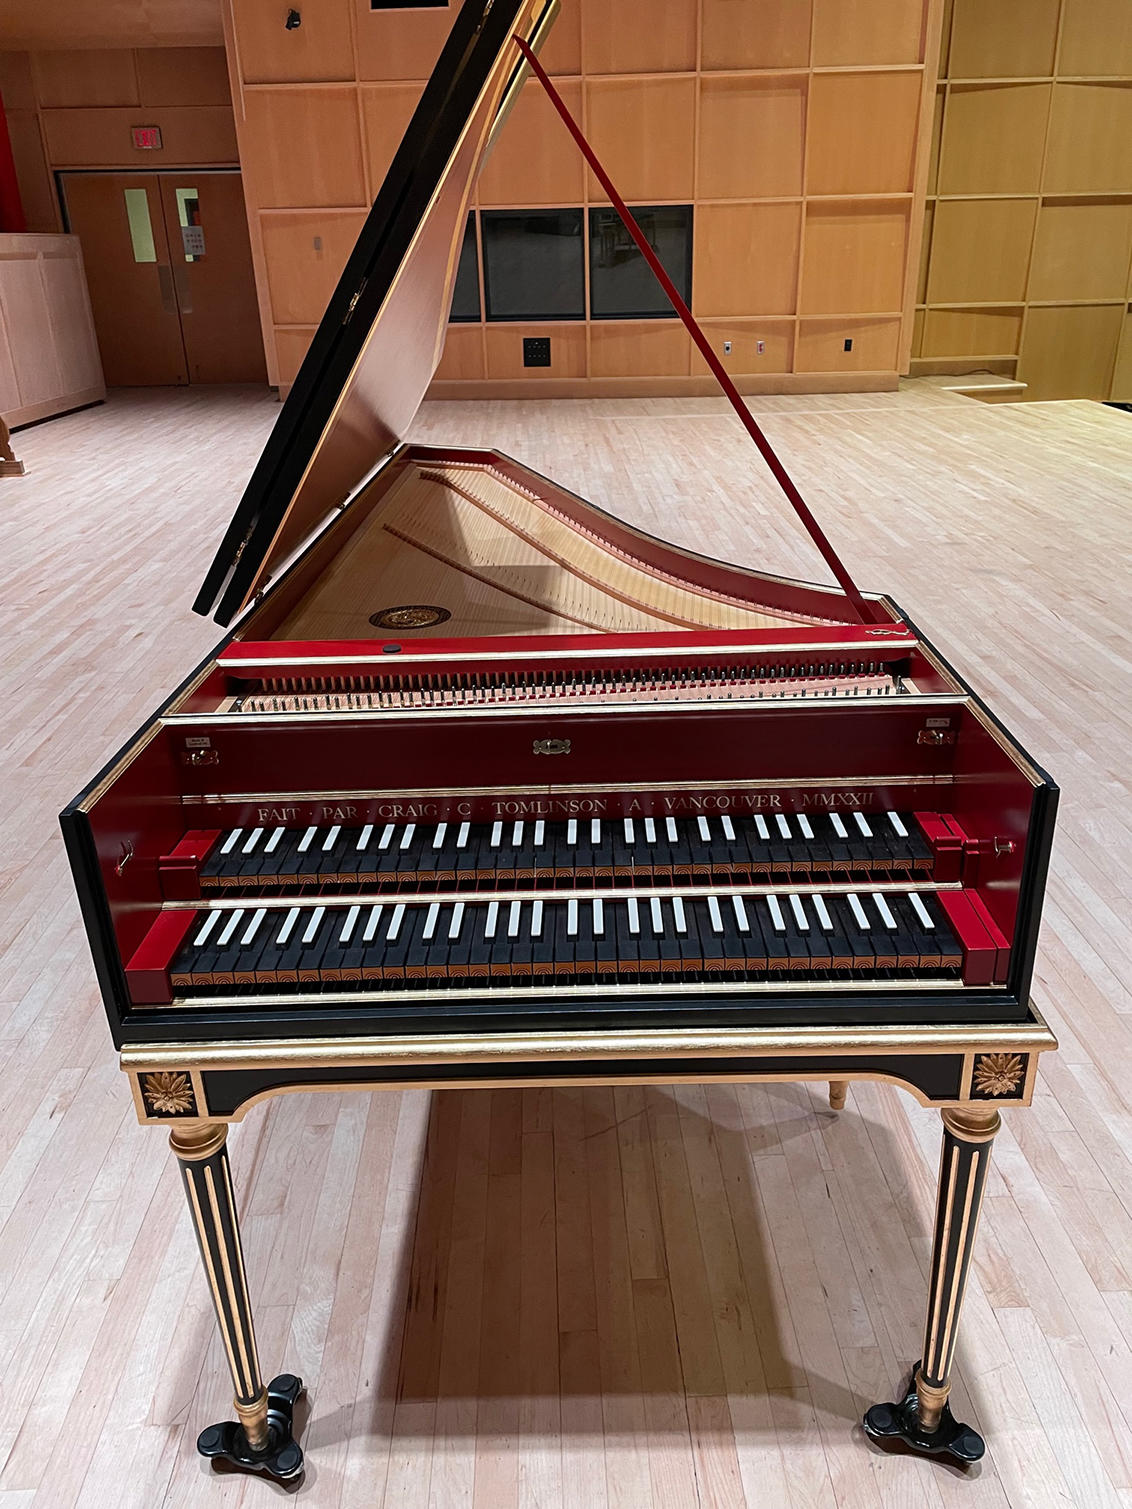 The Rozsa Centre houses a new harpsichord built by Vancouverite Craig Tomlinson